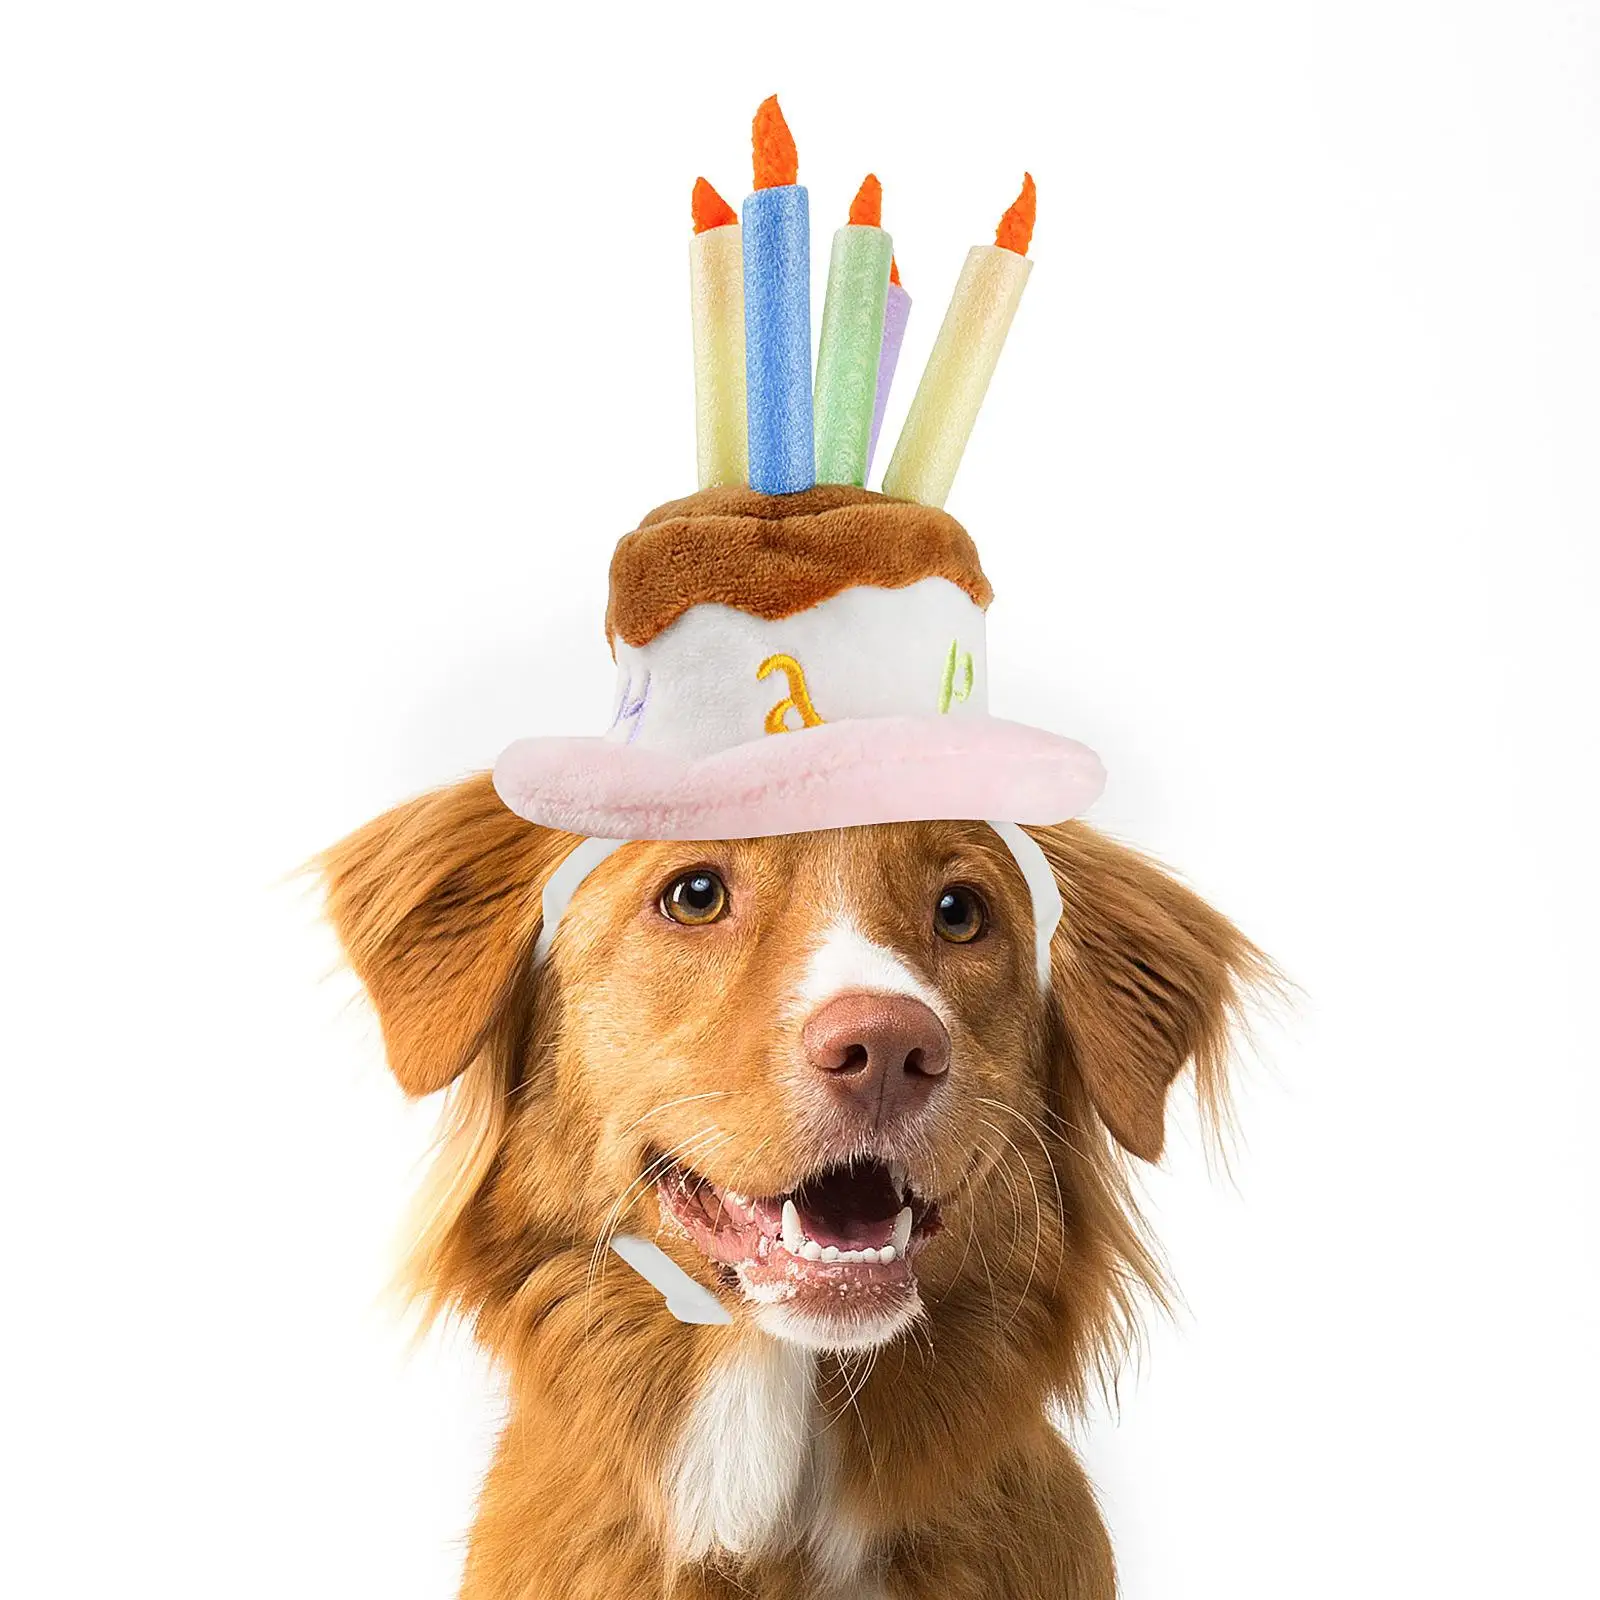 Adorable Pet Headwear Costume Accessories Apparel Outfits Dog Cat Birthday Cake Hat for Puppy Photograph Holiday Party Easter